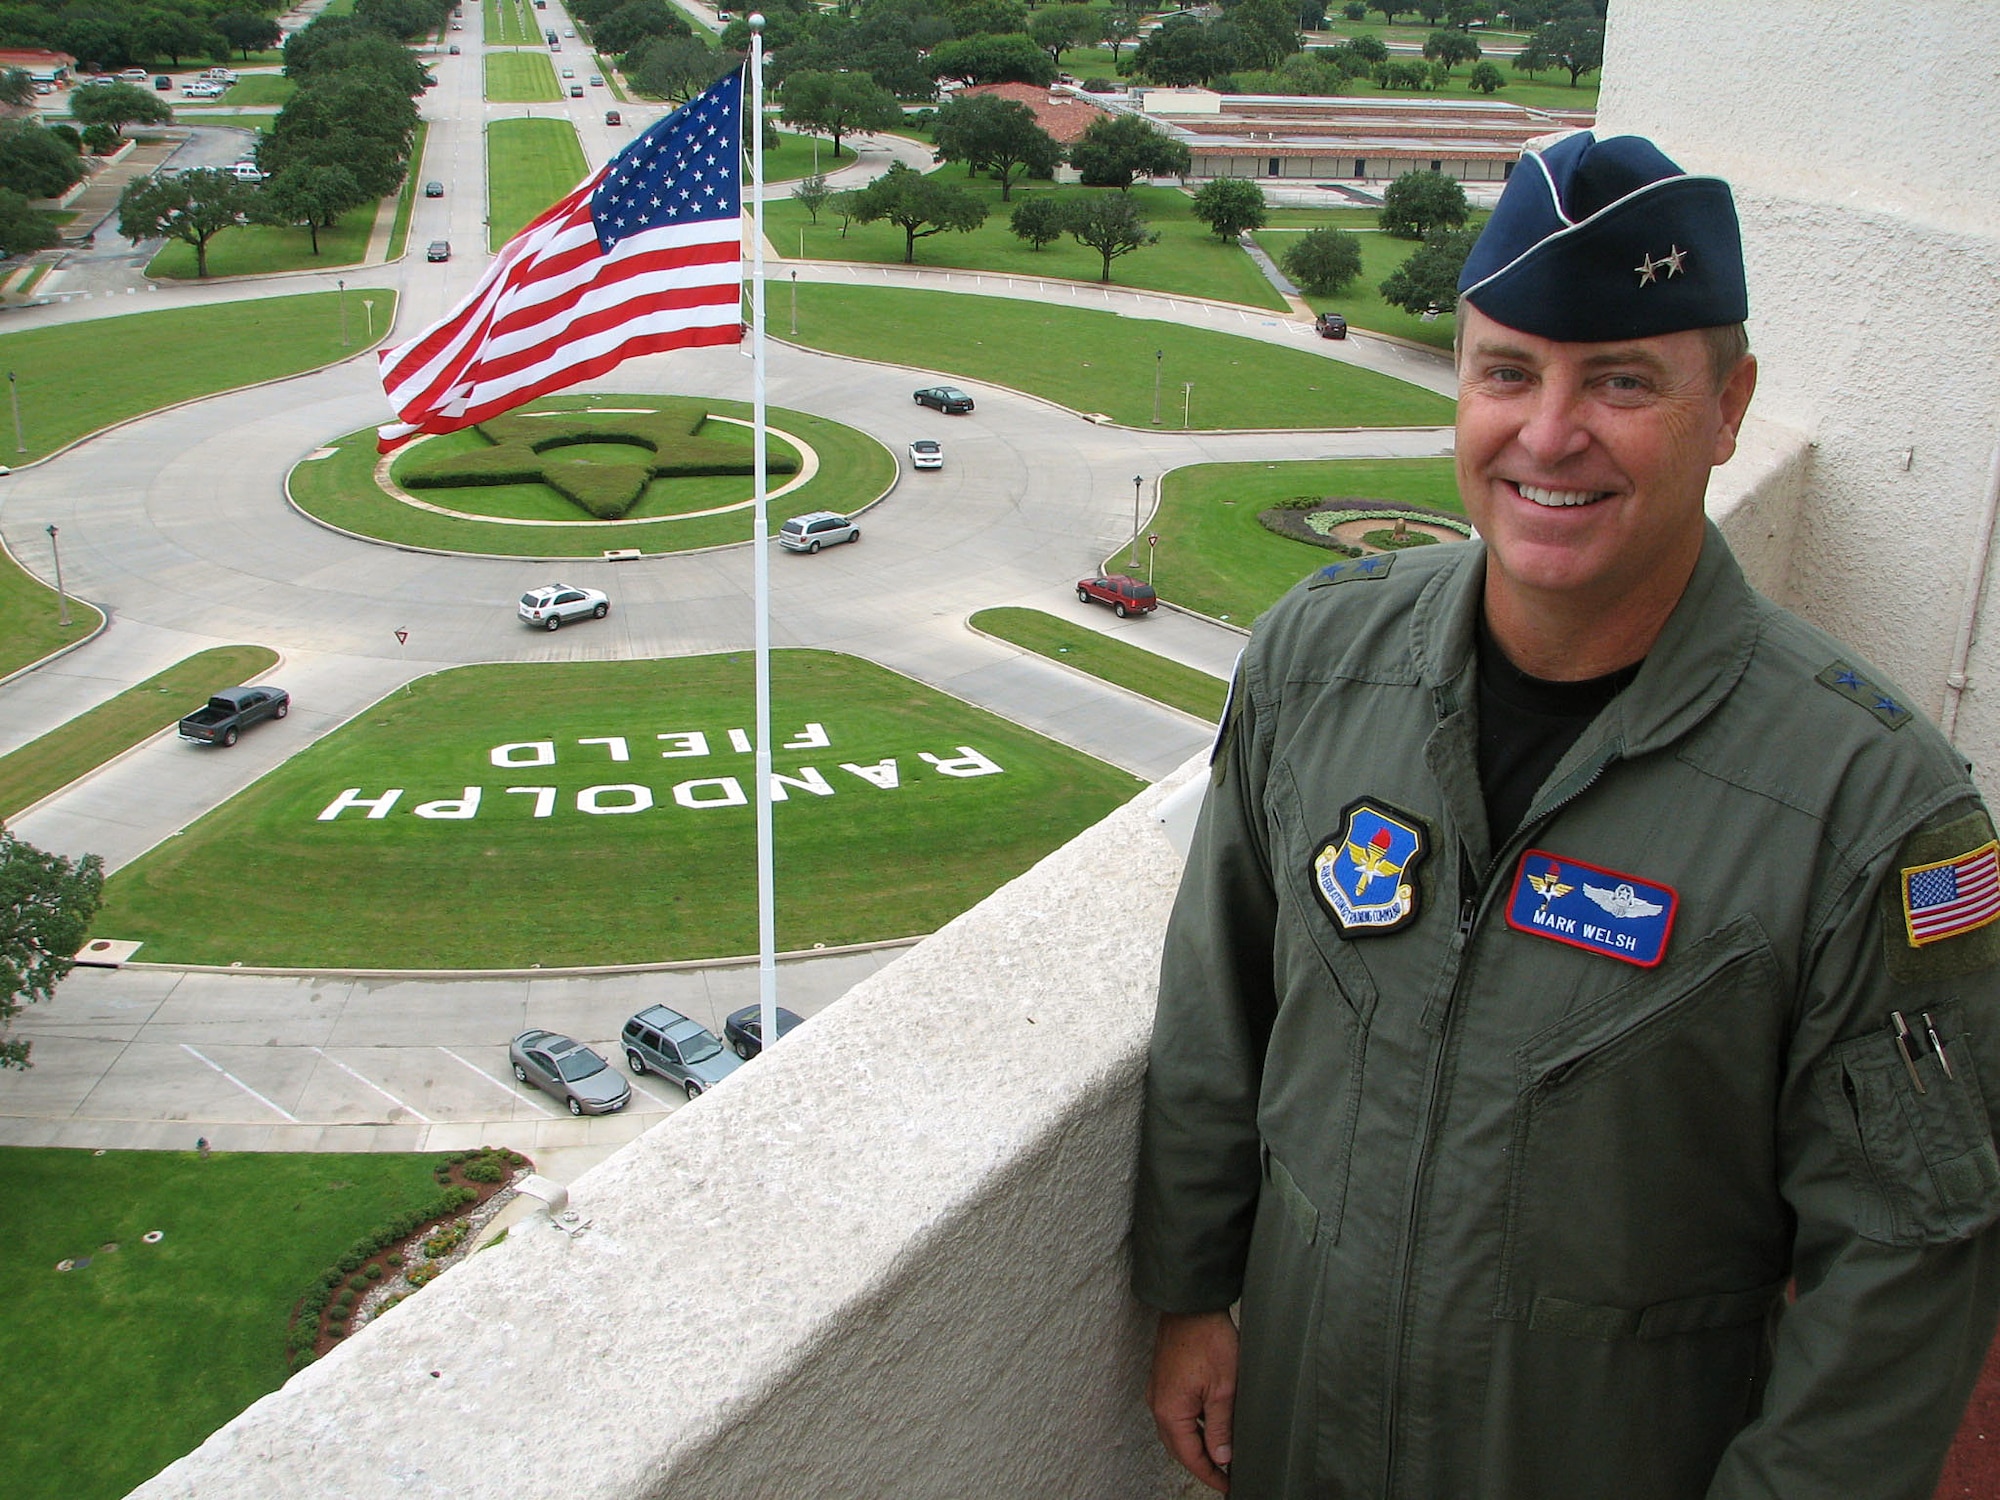 Maj. Gen. Mark A. Welsh III, Air Education and Training Command vice commander, pauses while touring the observation deck of the historic "Taj Mahal" building housing the 12th Flying Training Wing headquarters at Randolph Air Force Base, Texas, July 26.  General Welsh replaces Lt. Gen. Dennis Larsen, who retired today (July 27, 2007).  (U.S. Air Force photo by Tech. Sgt. Mike Hammond)